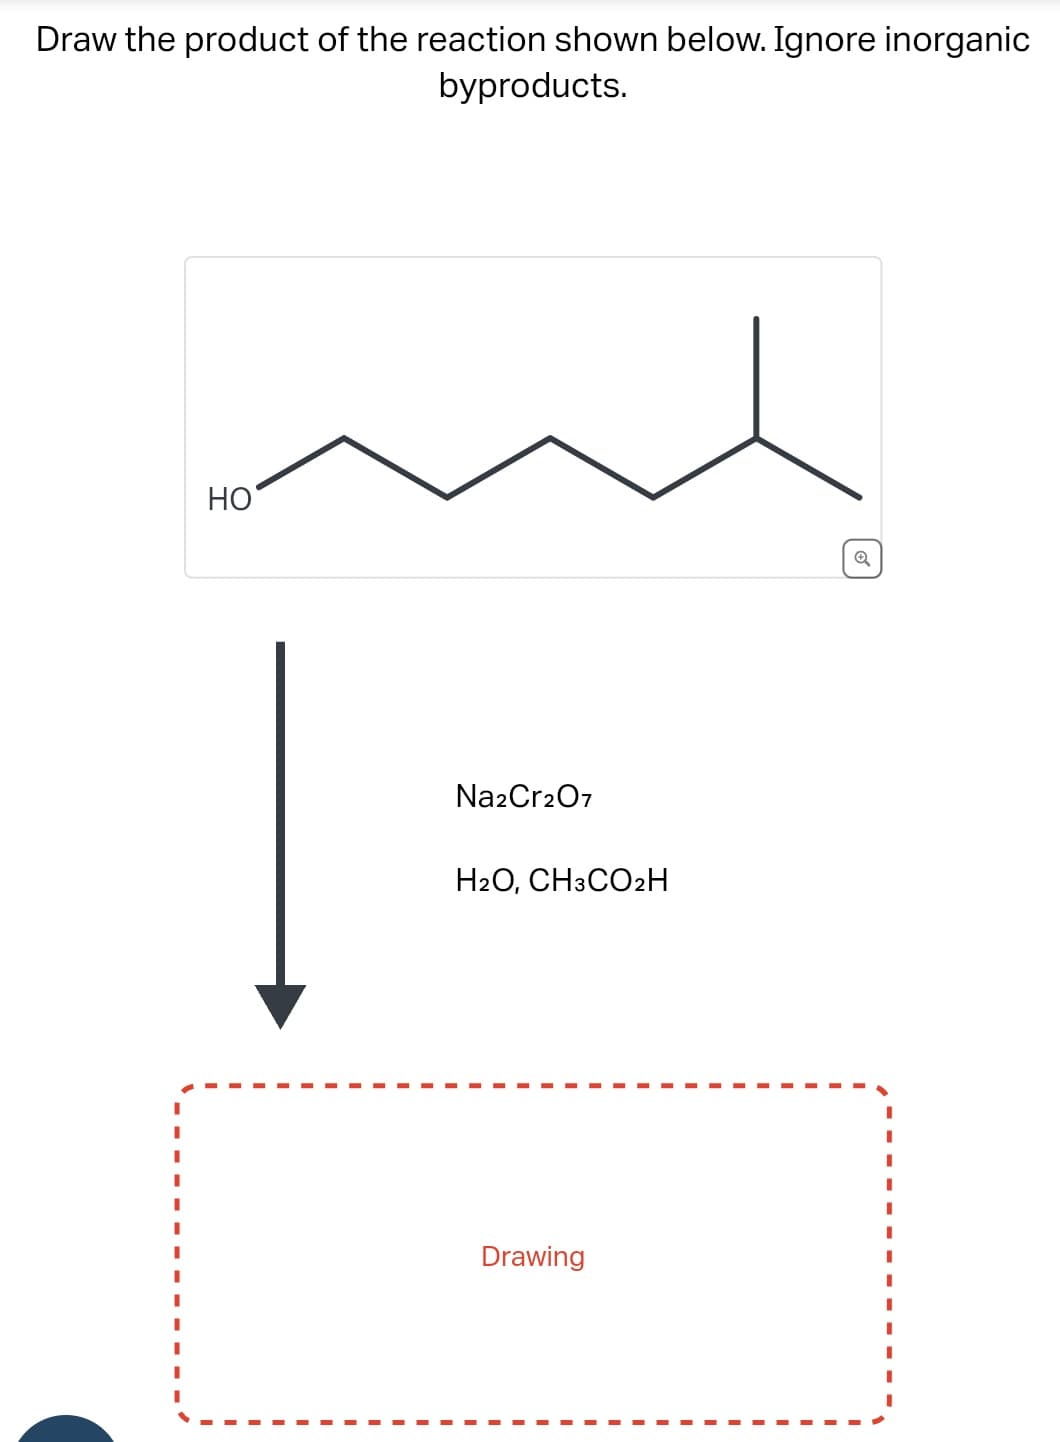 Draw the product of the reaction shown below. Ignore inorganic
byproducts.
HO
Na2Cr2O7
H2O, CH3CO₂H
Drawing